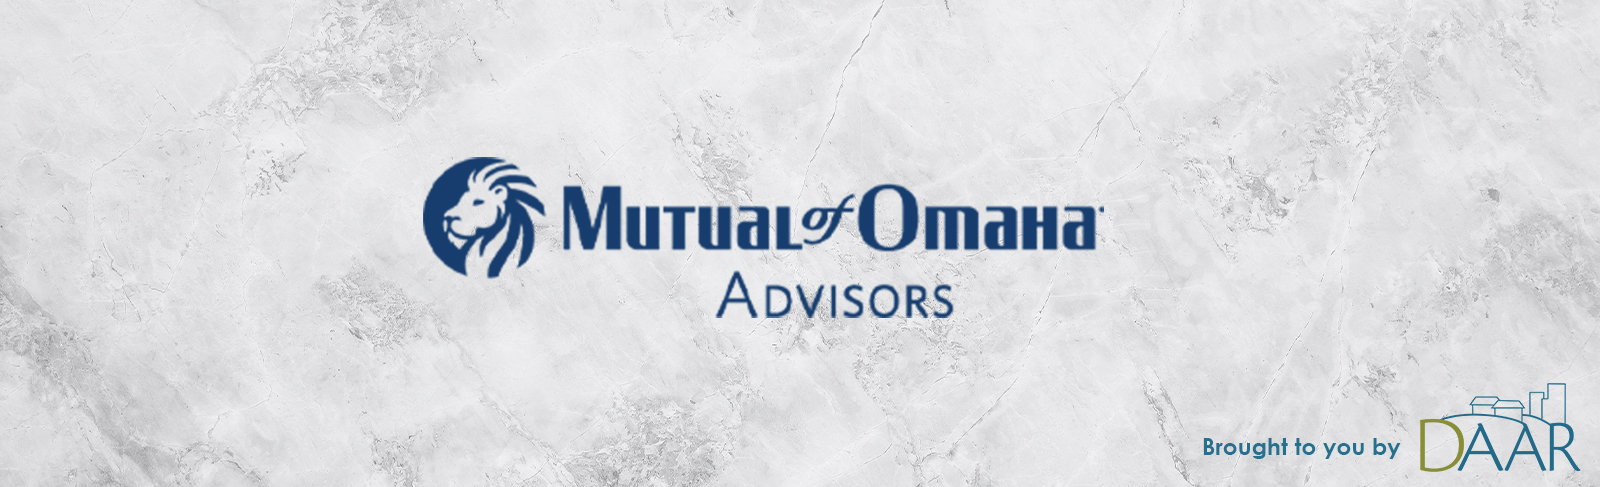 Mutual of Omaha Advisors brought to you by DAAR